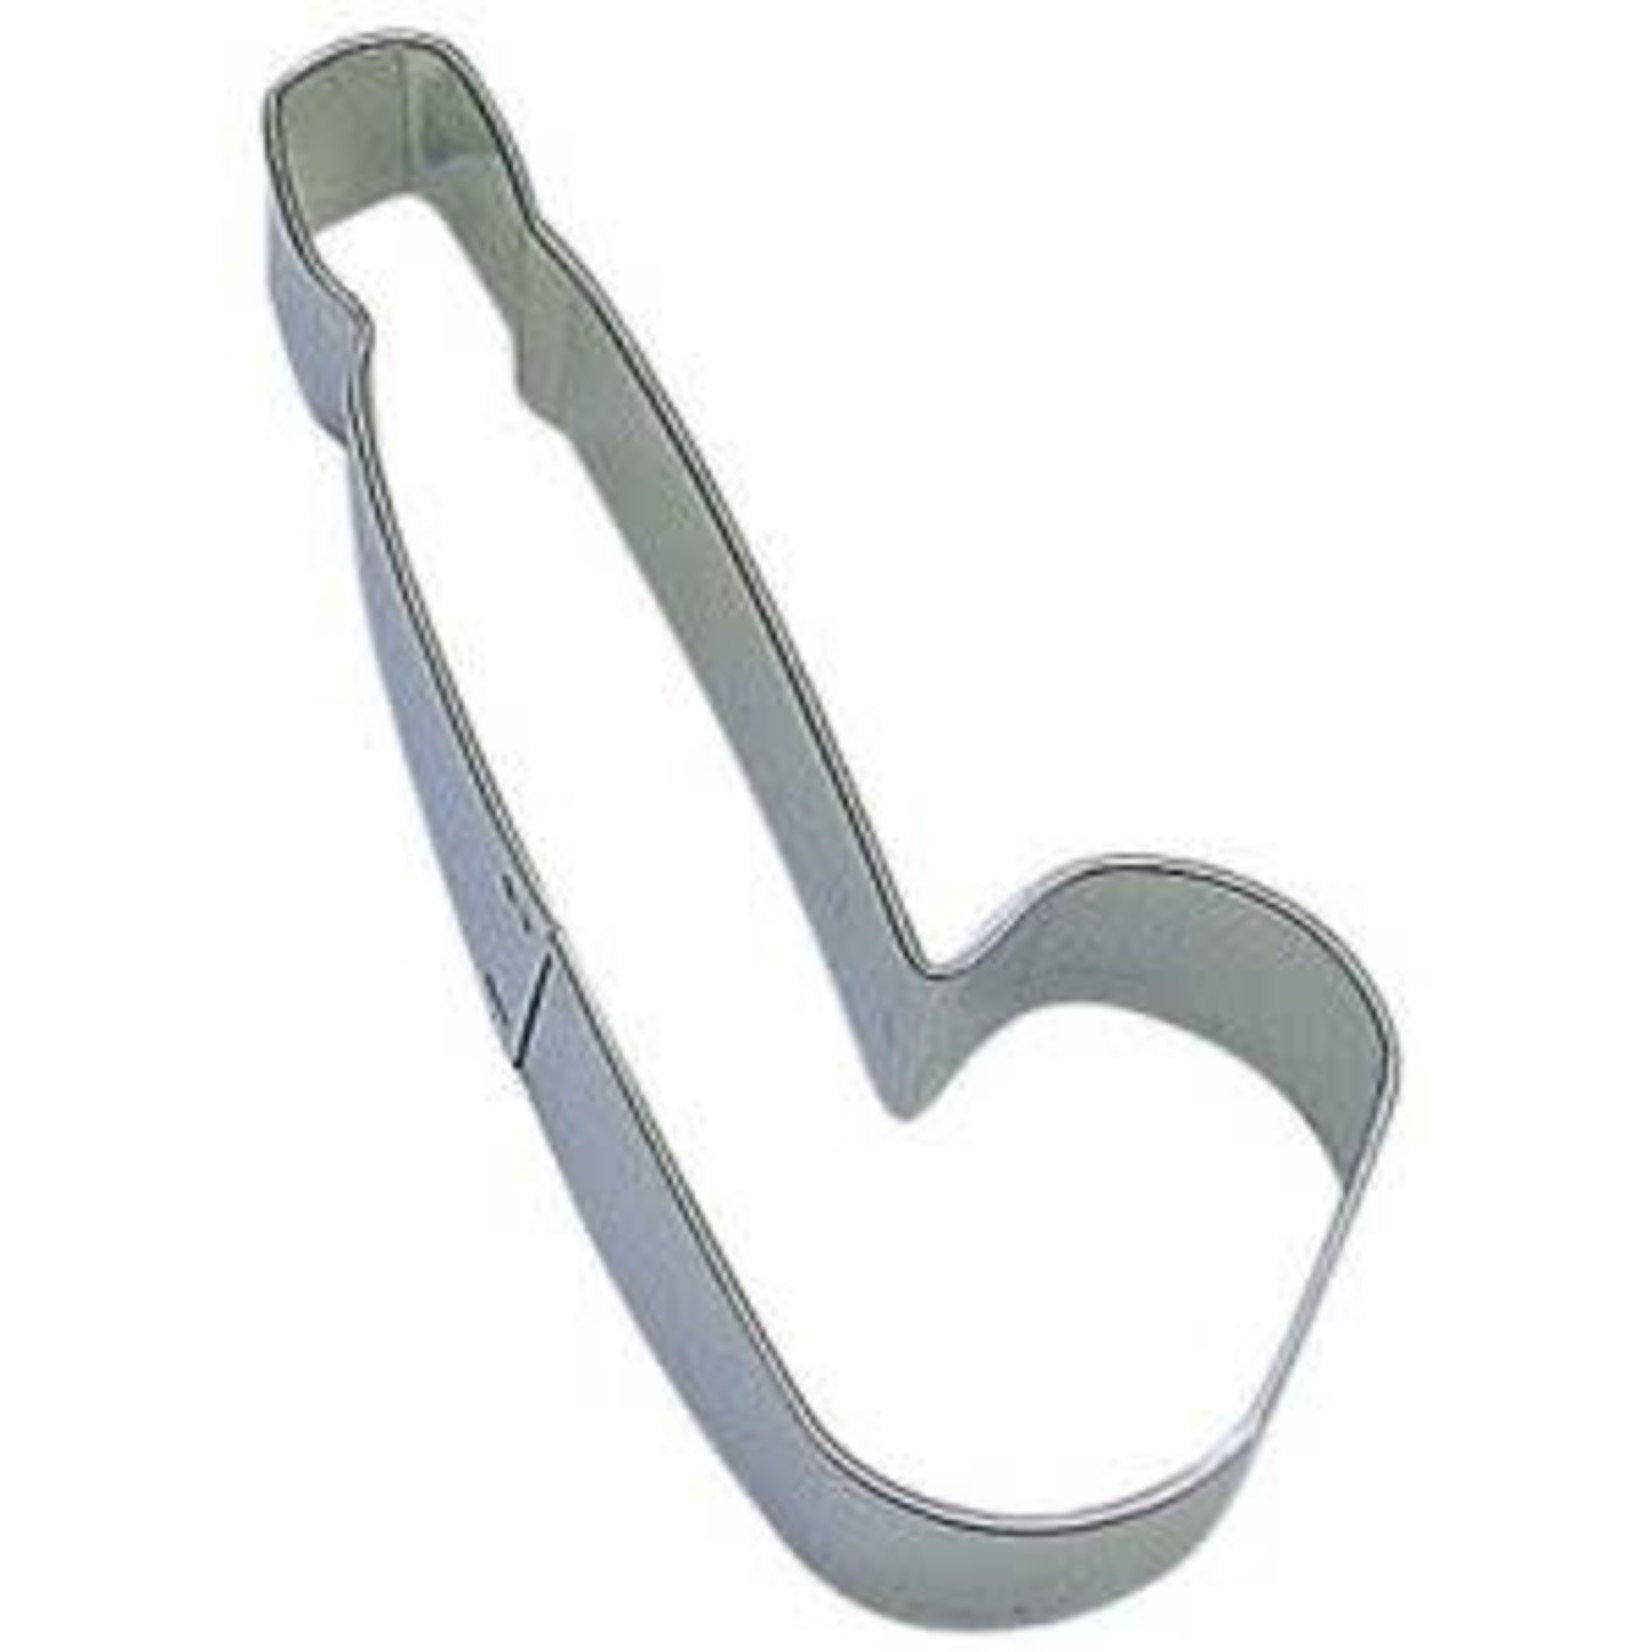 4" Blow-Out Cookie Cutter